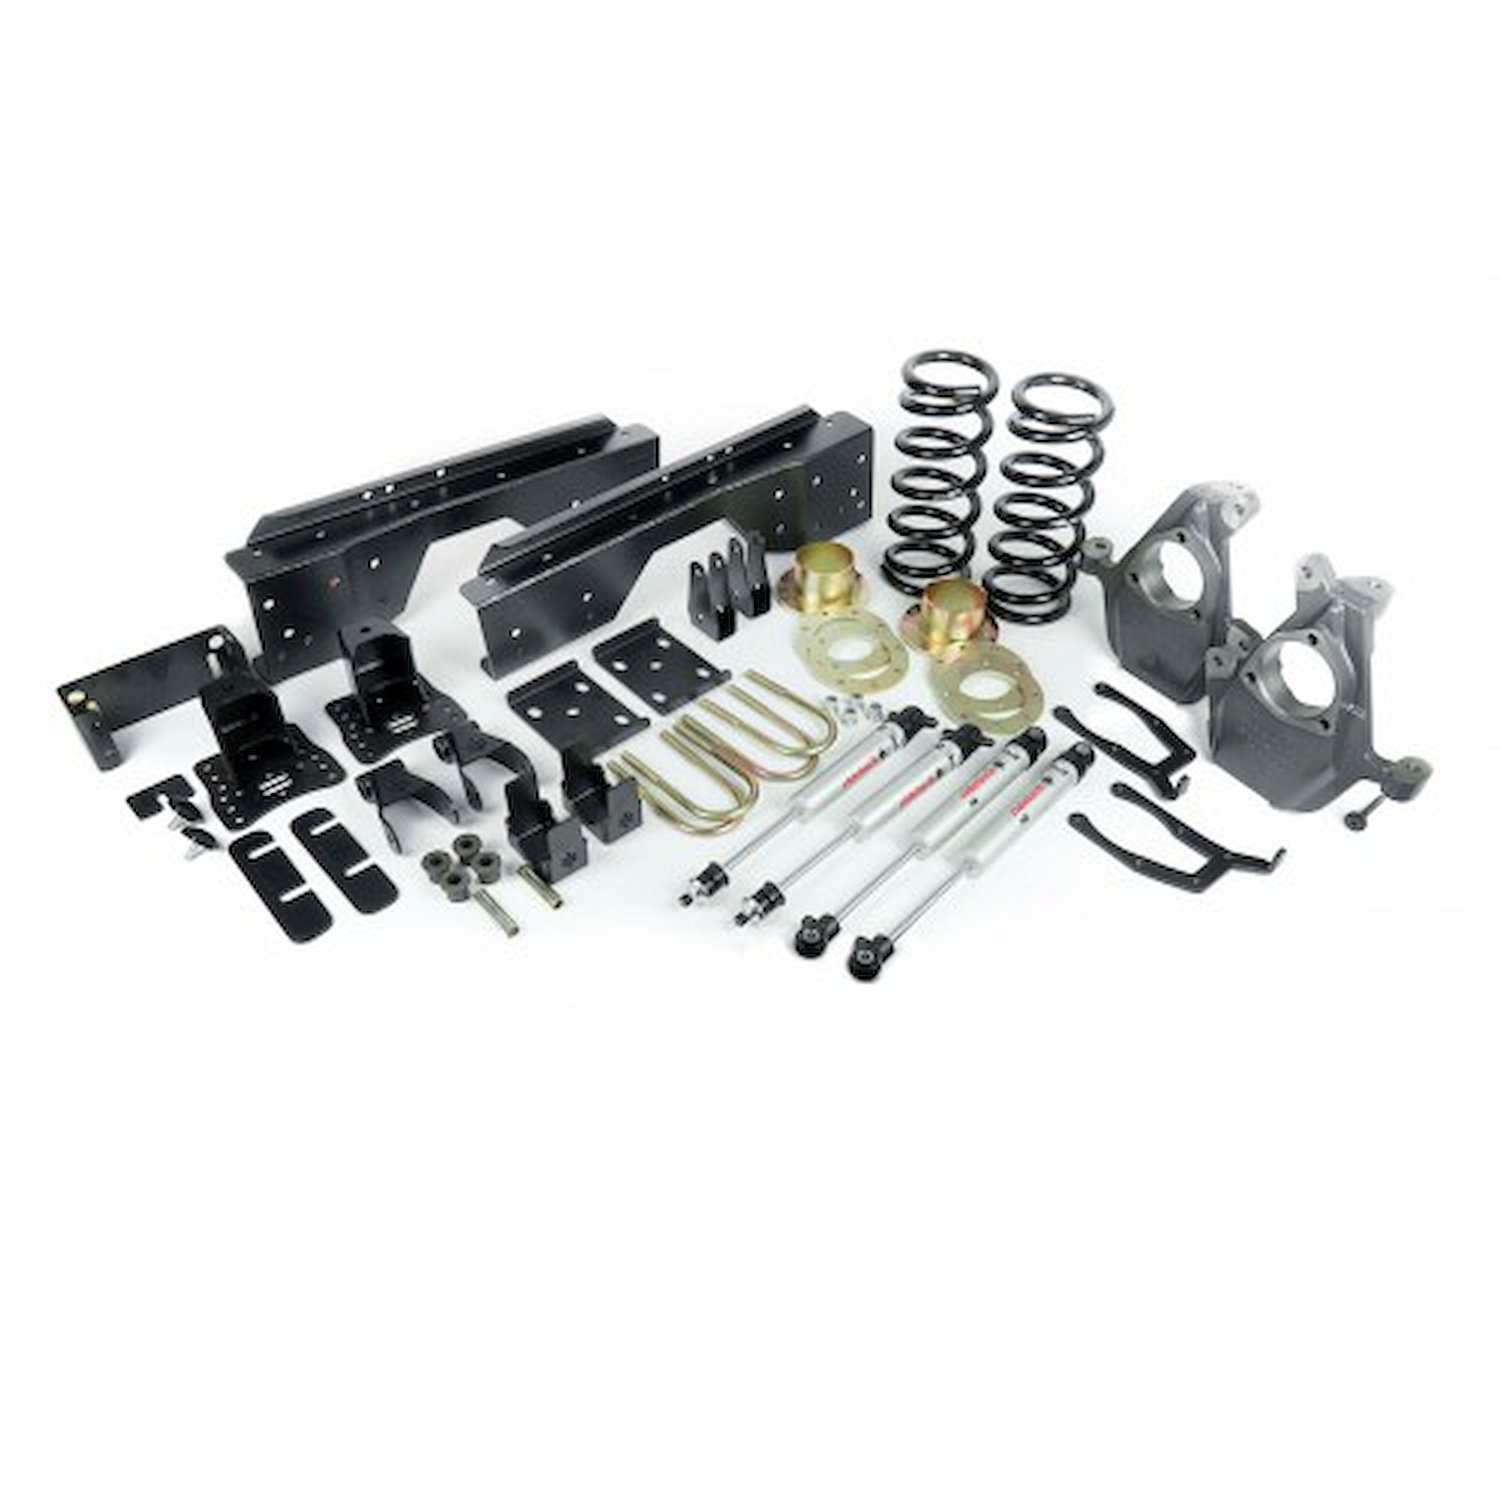 11380110 StreetGrip Suspension System for 1999-2006 GM 1500 2WD Trucks [3-5 in. Drop]